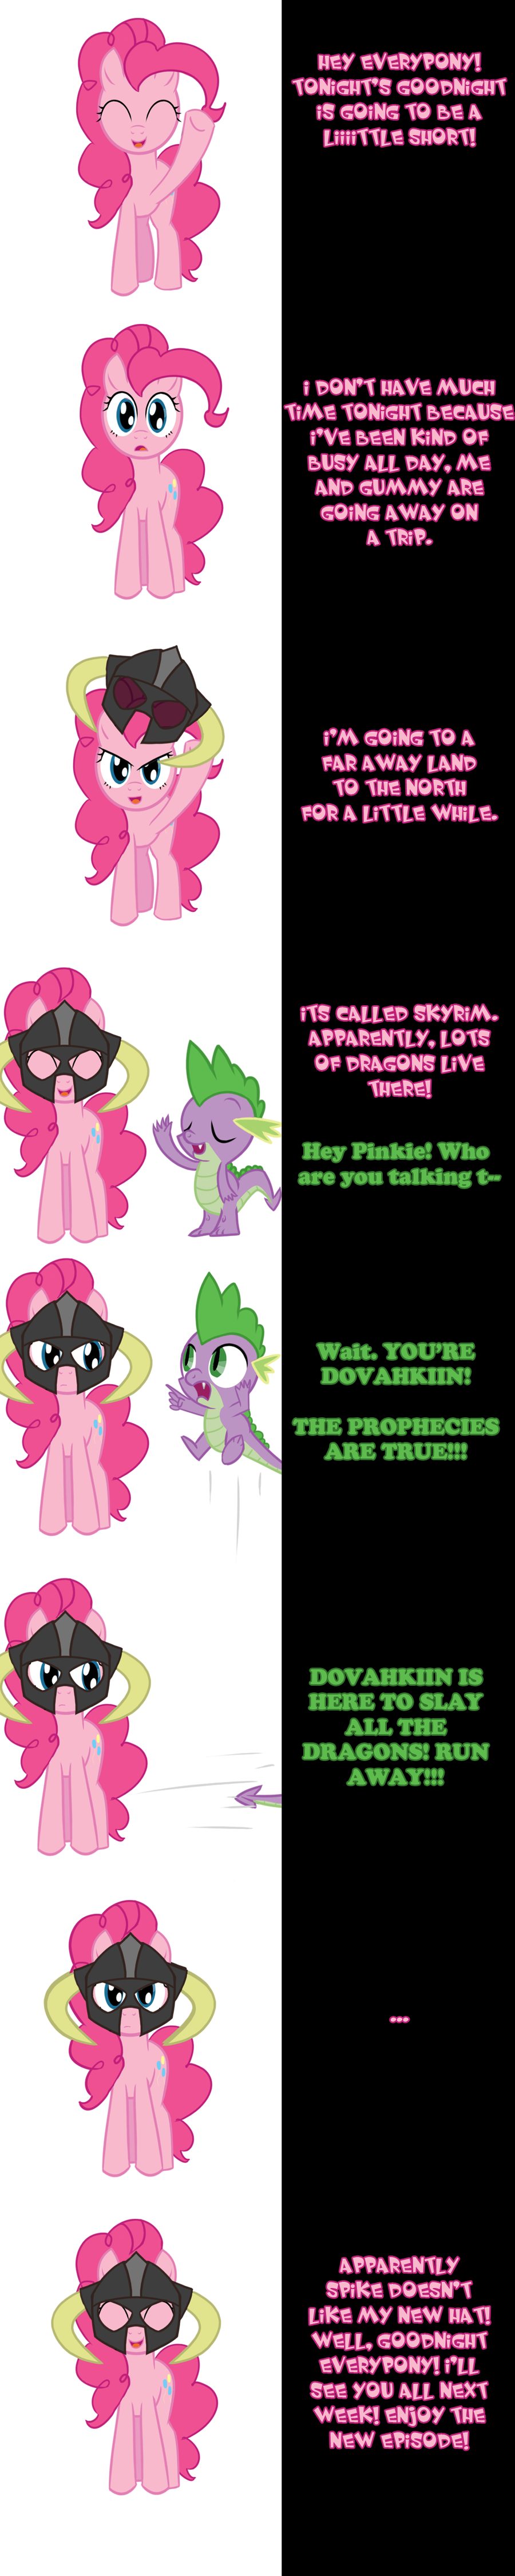 pinkie_says_fus_ro_dah_by_undead_niklos-d4fvafw.png